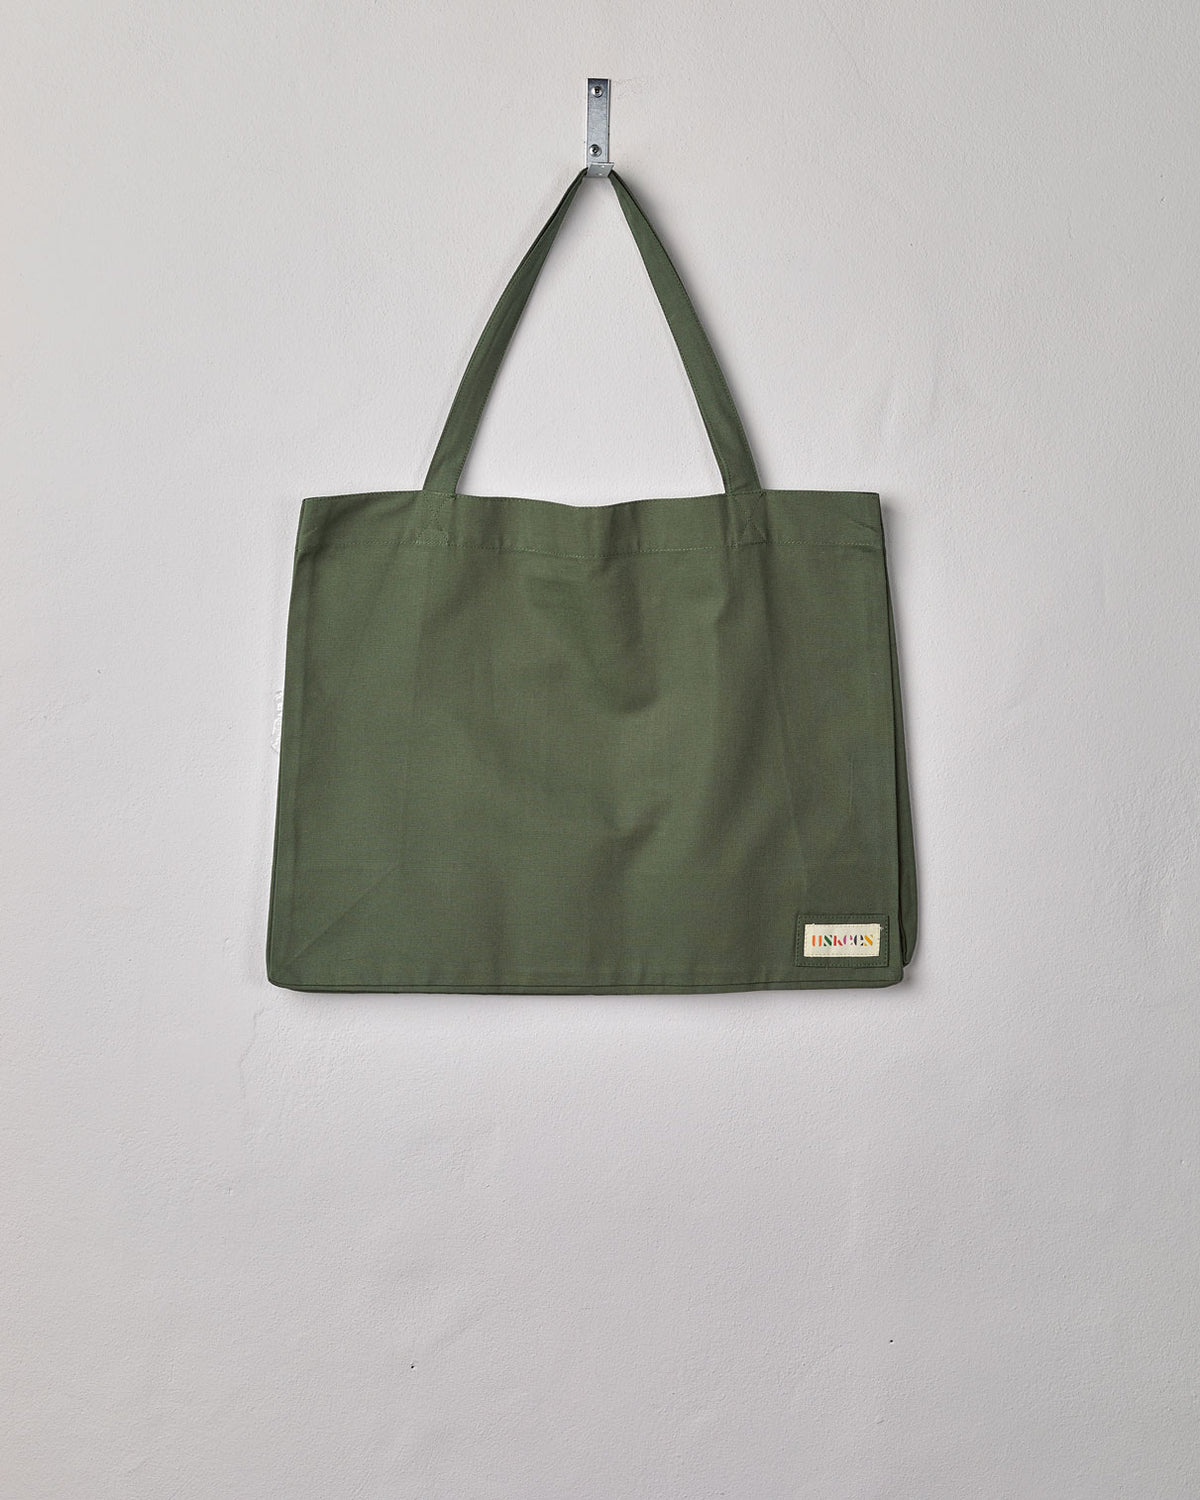 Uskees bags | small and large tote bags in various colours